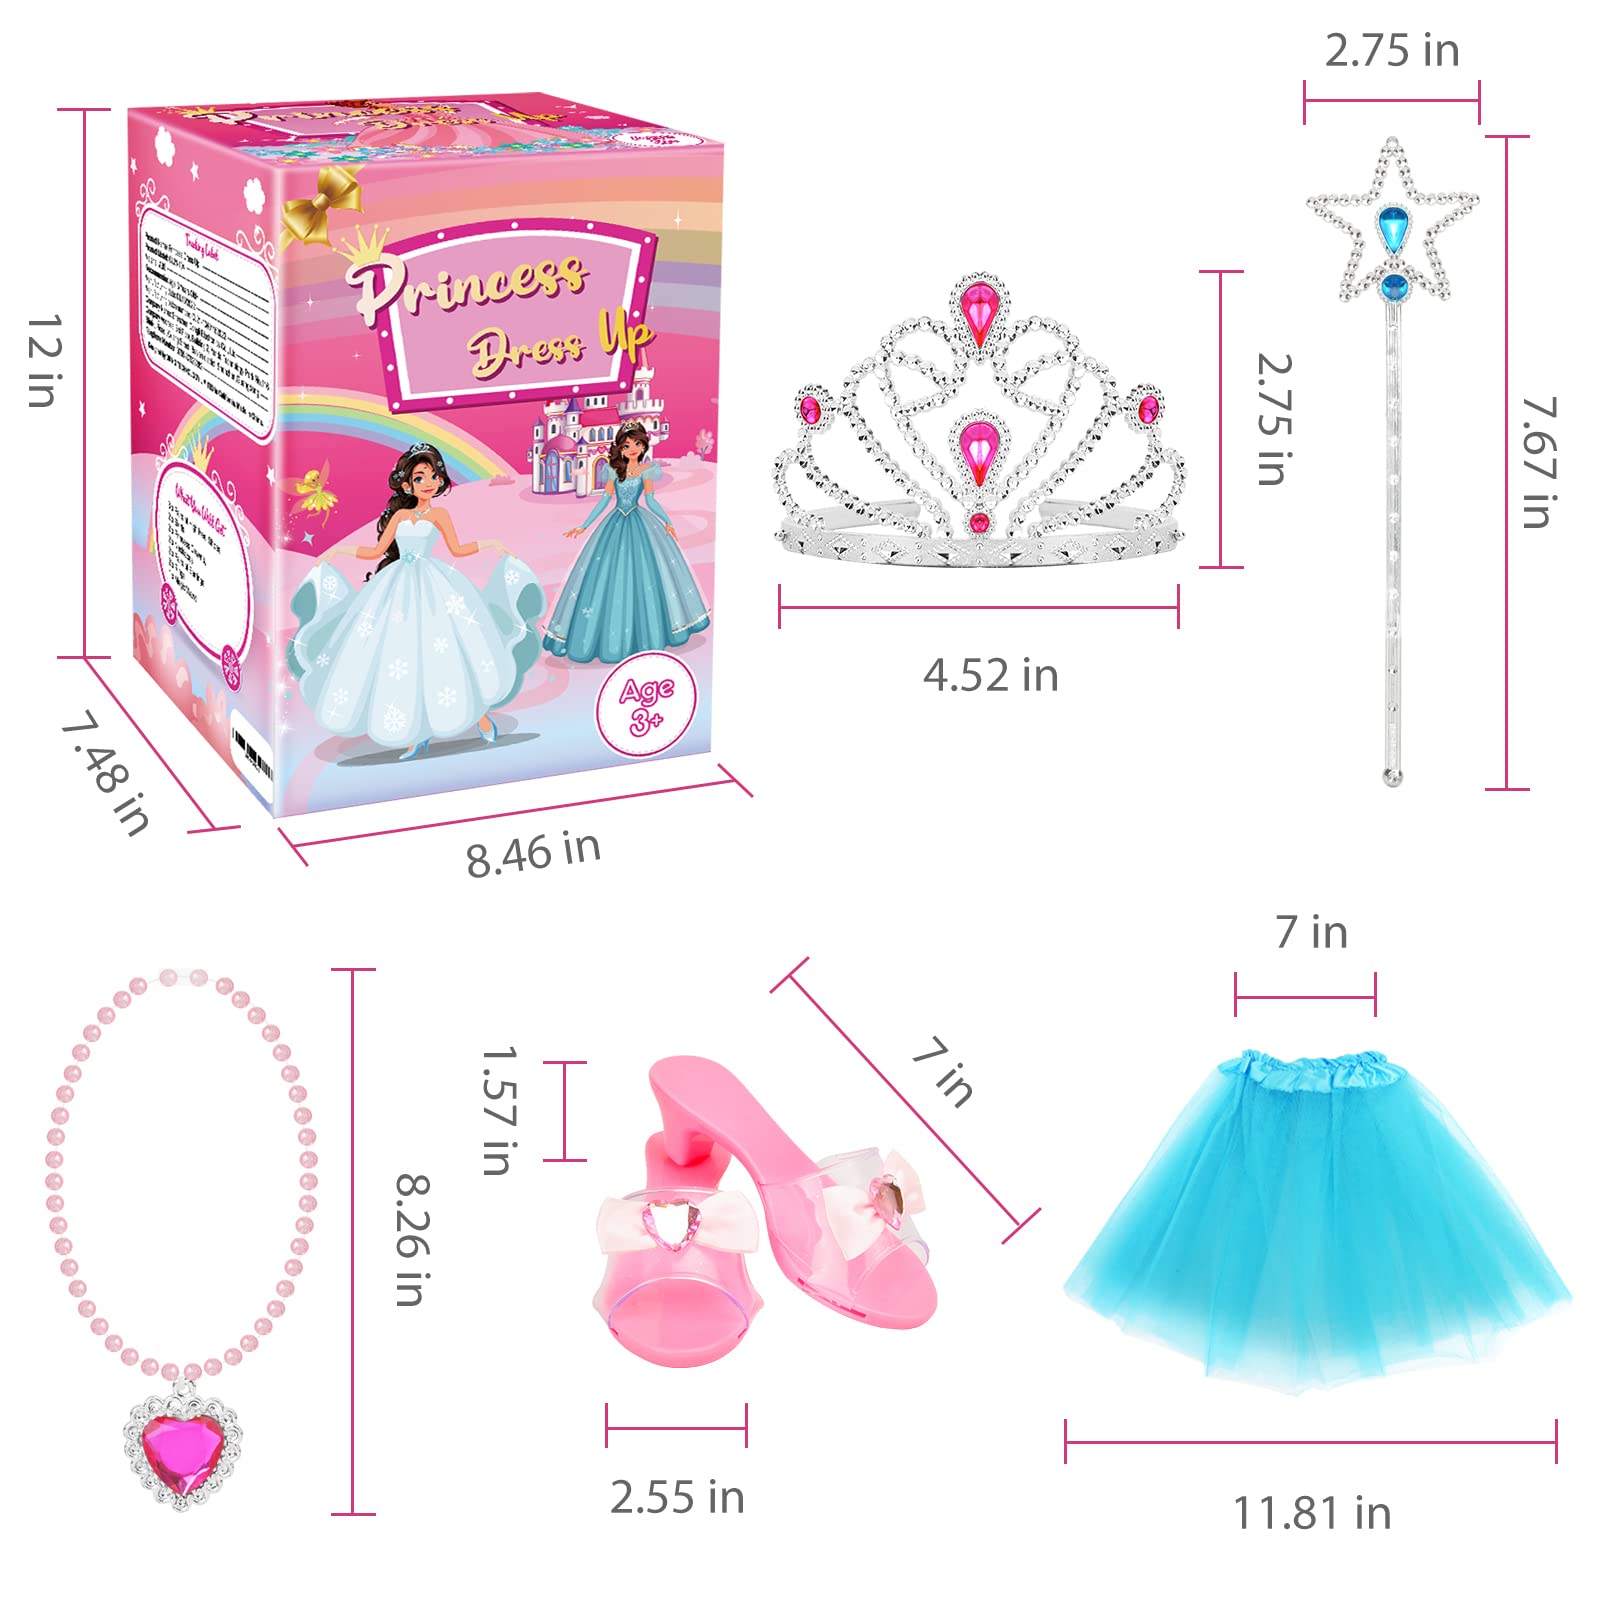 Princess Dress Up Shoes and Jewelry Boutique, Pretend Play Toy Set for Little Girls, Princess Accessories Set with Jewelry, Fashion Skirts, Heel Shoes, Beauty Toddler Gift for Age 3 4 5 6 Years Old